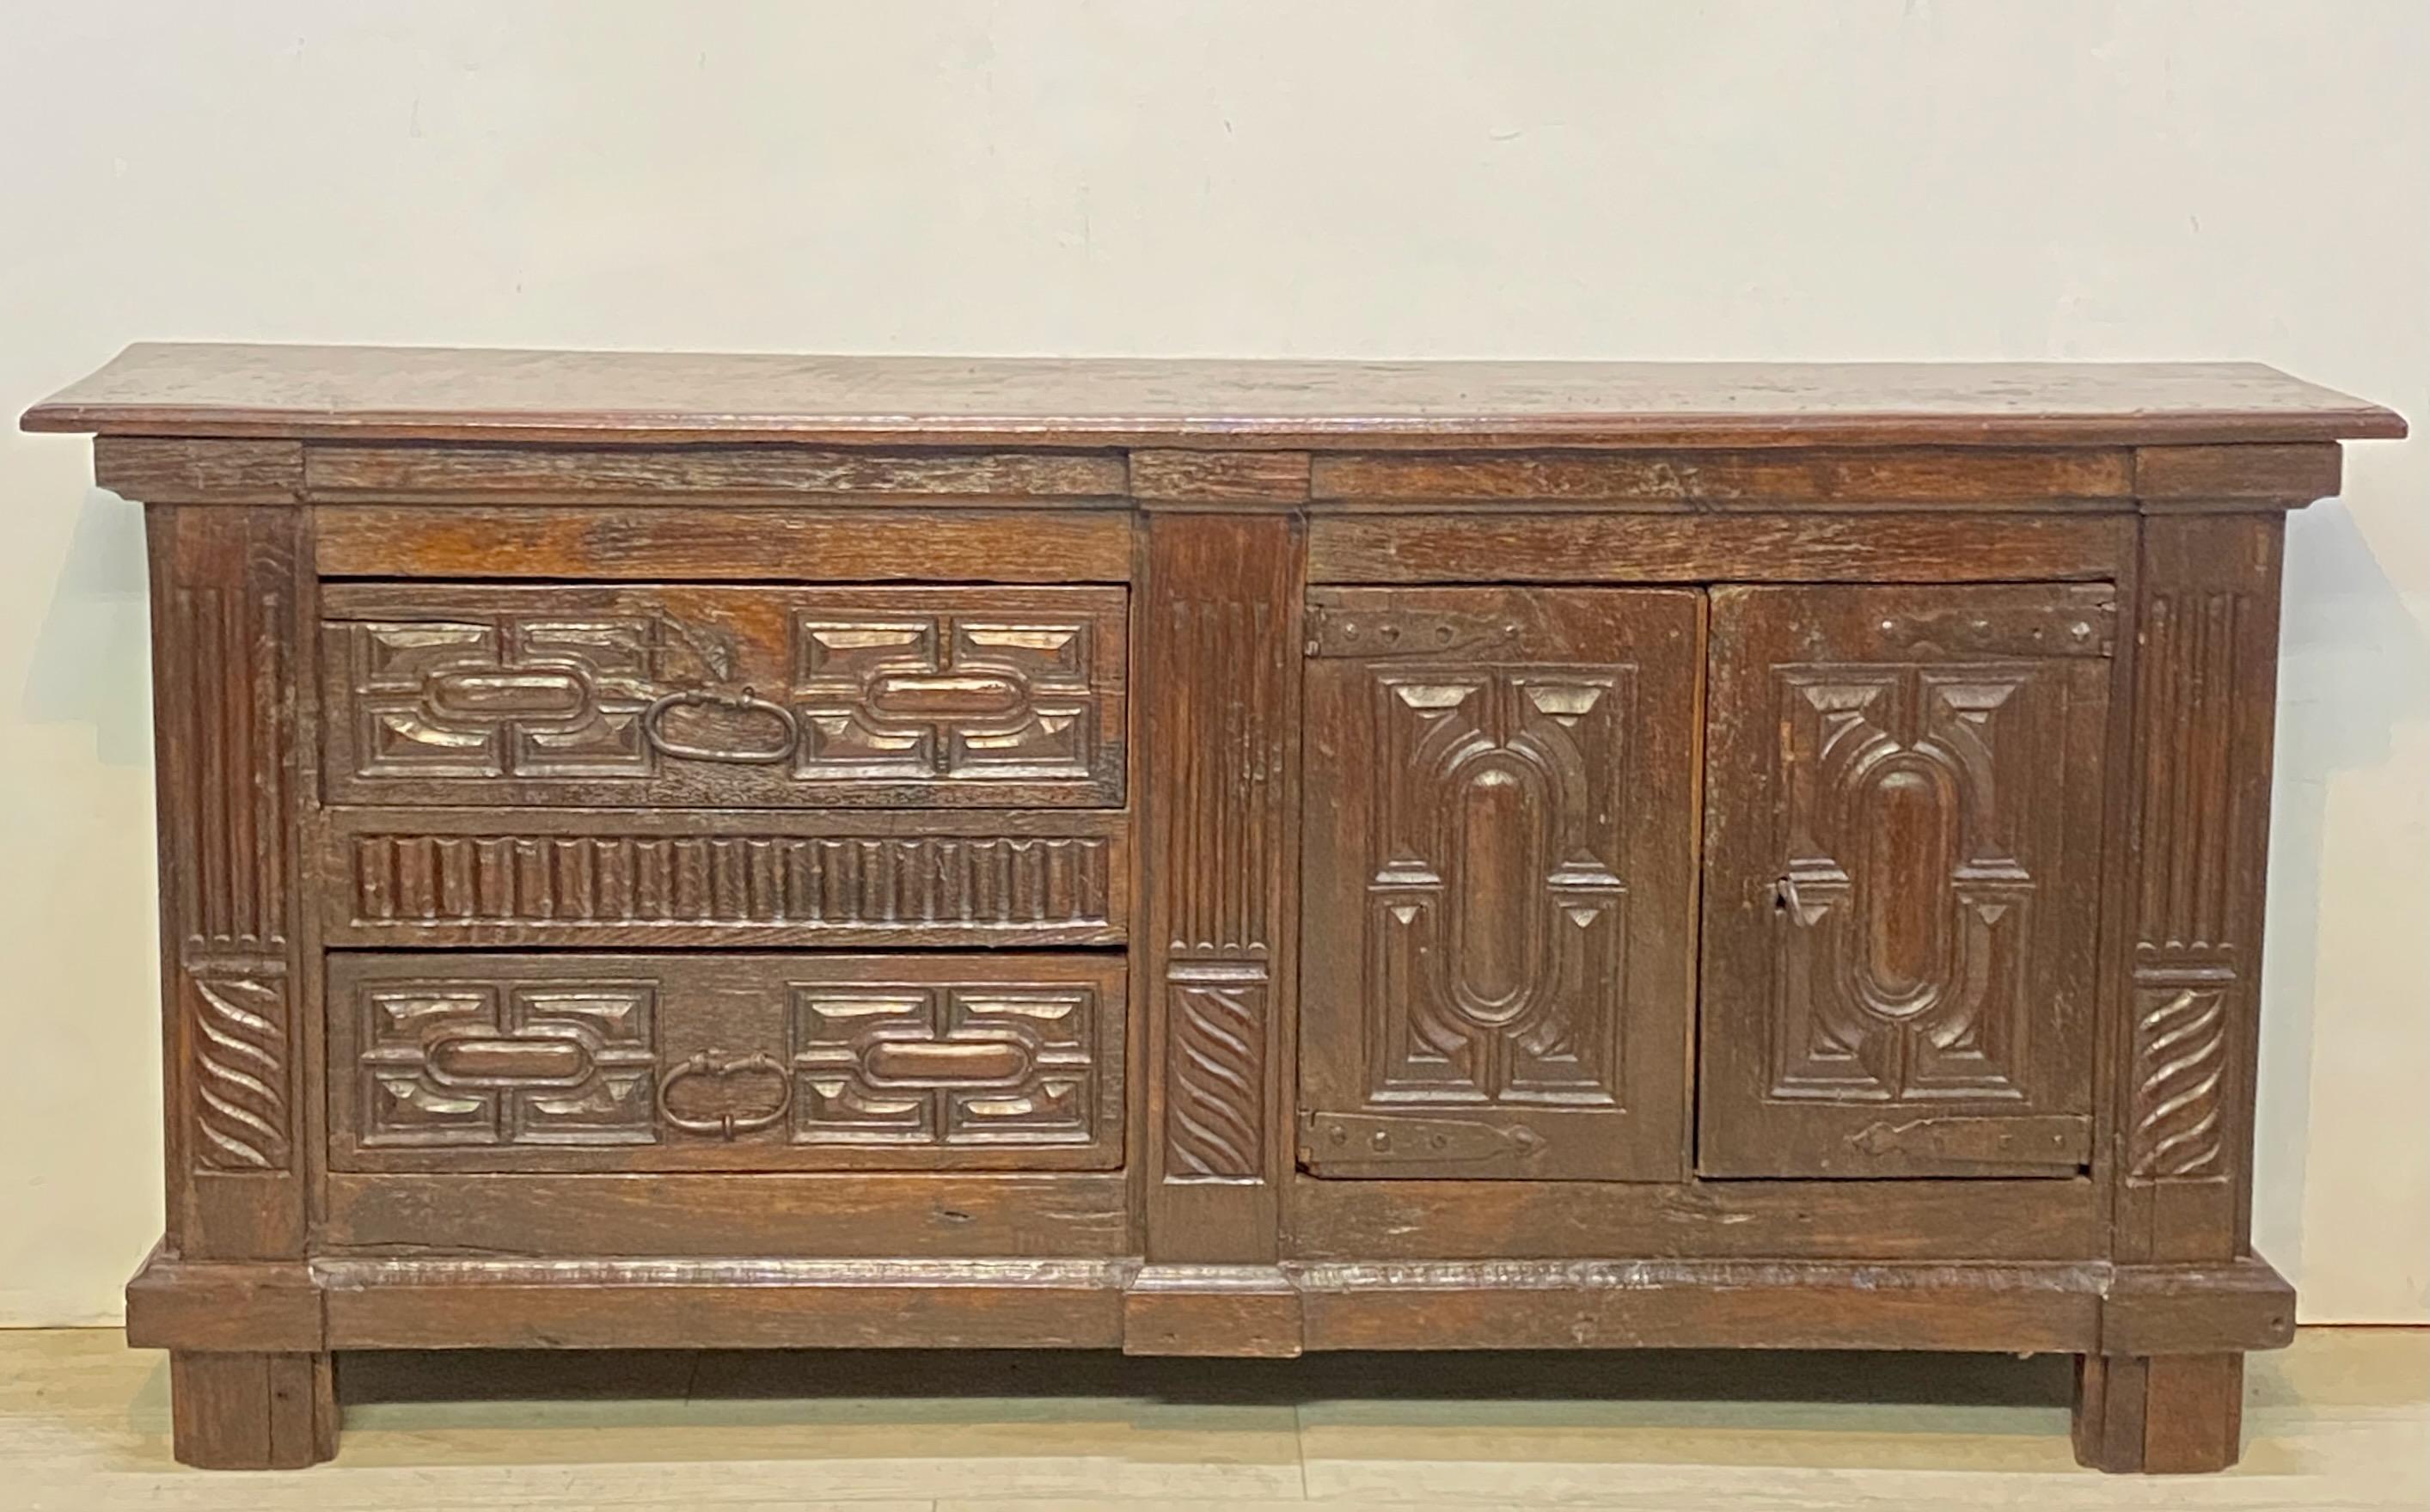 Carved oak low side cabinet or credenza with original hand forged wrought iron hardware and original lock with working key.
Very old if not original finish.
Possibly reduced in depth some time ago.
Spain, late 17th century - early 18th century.